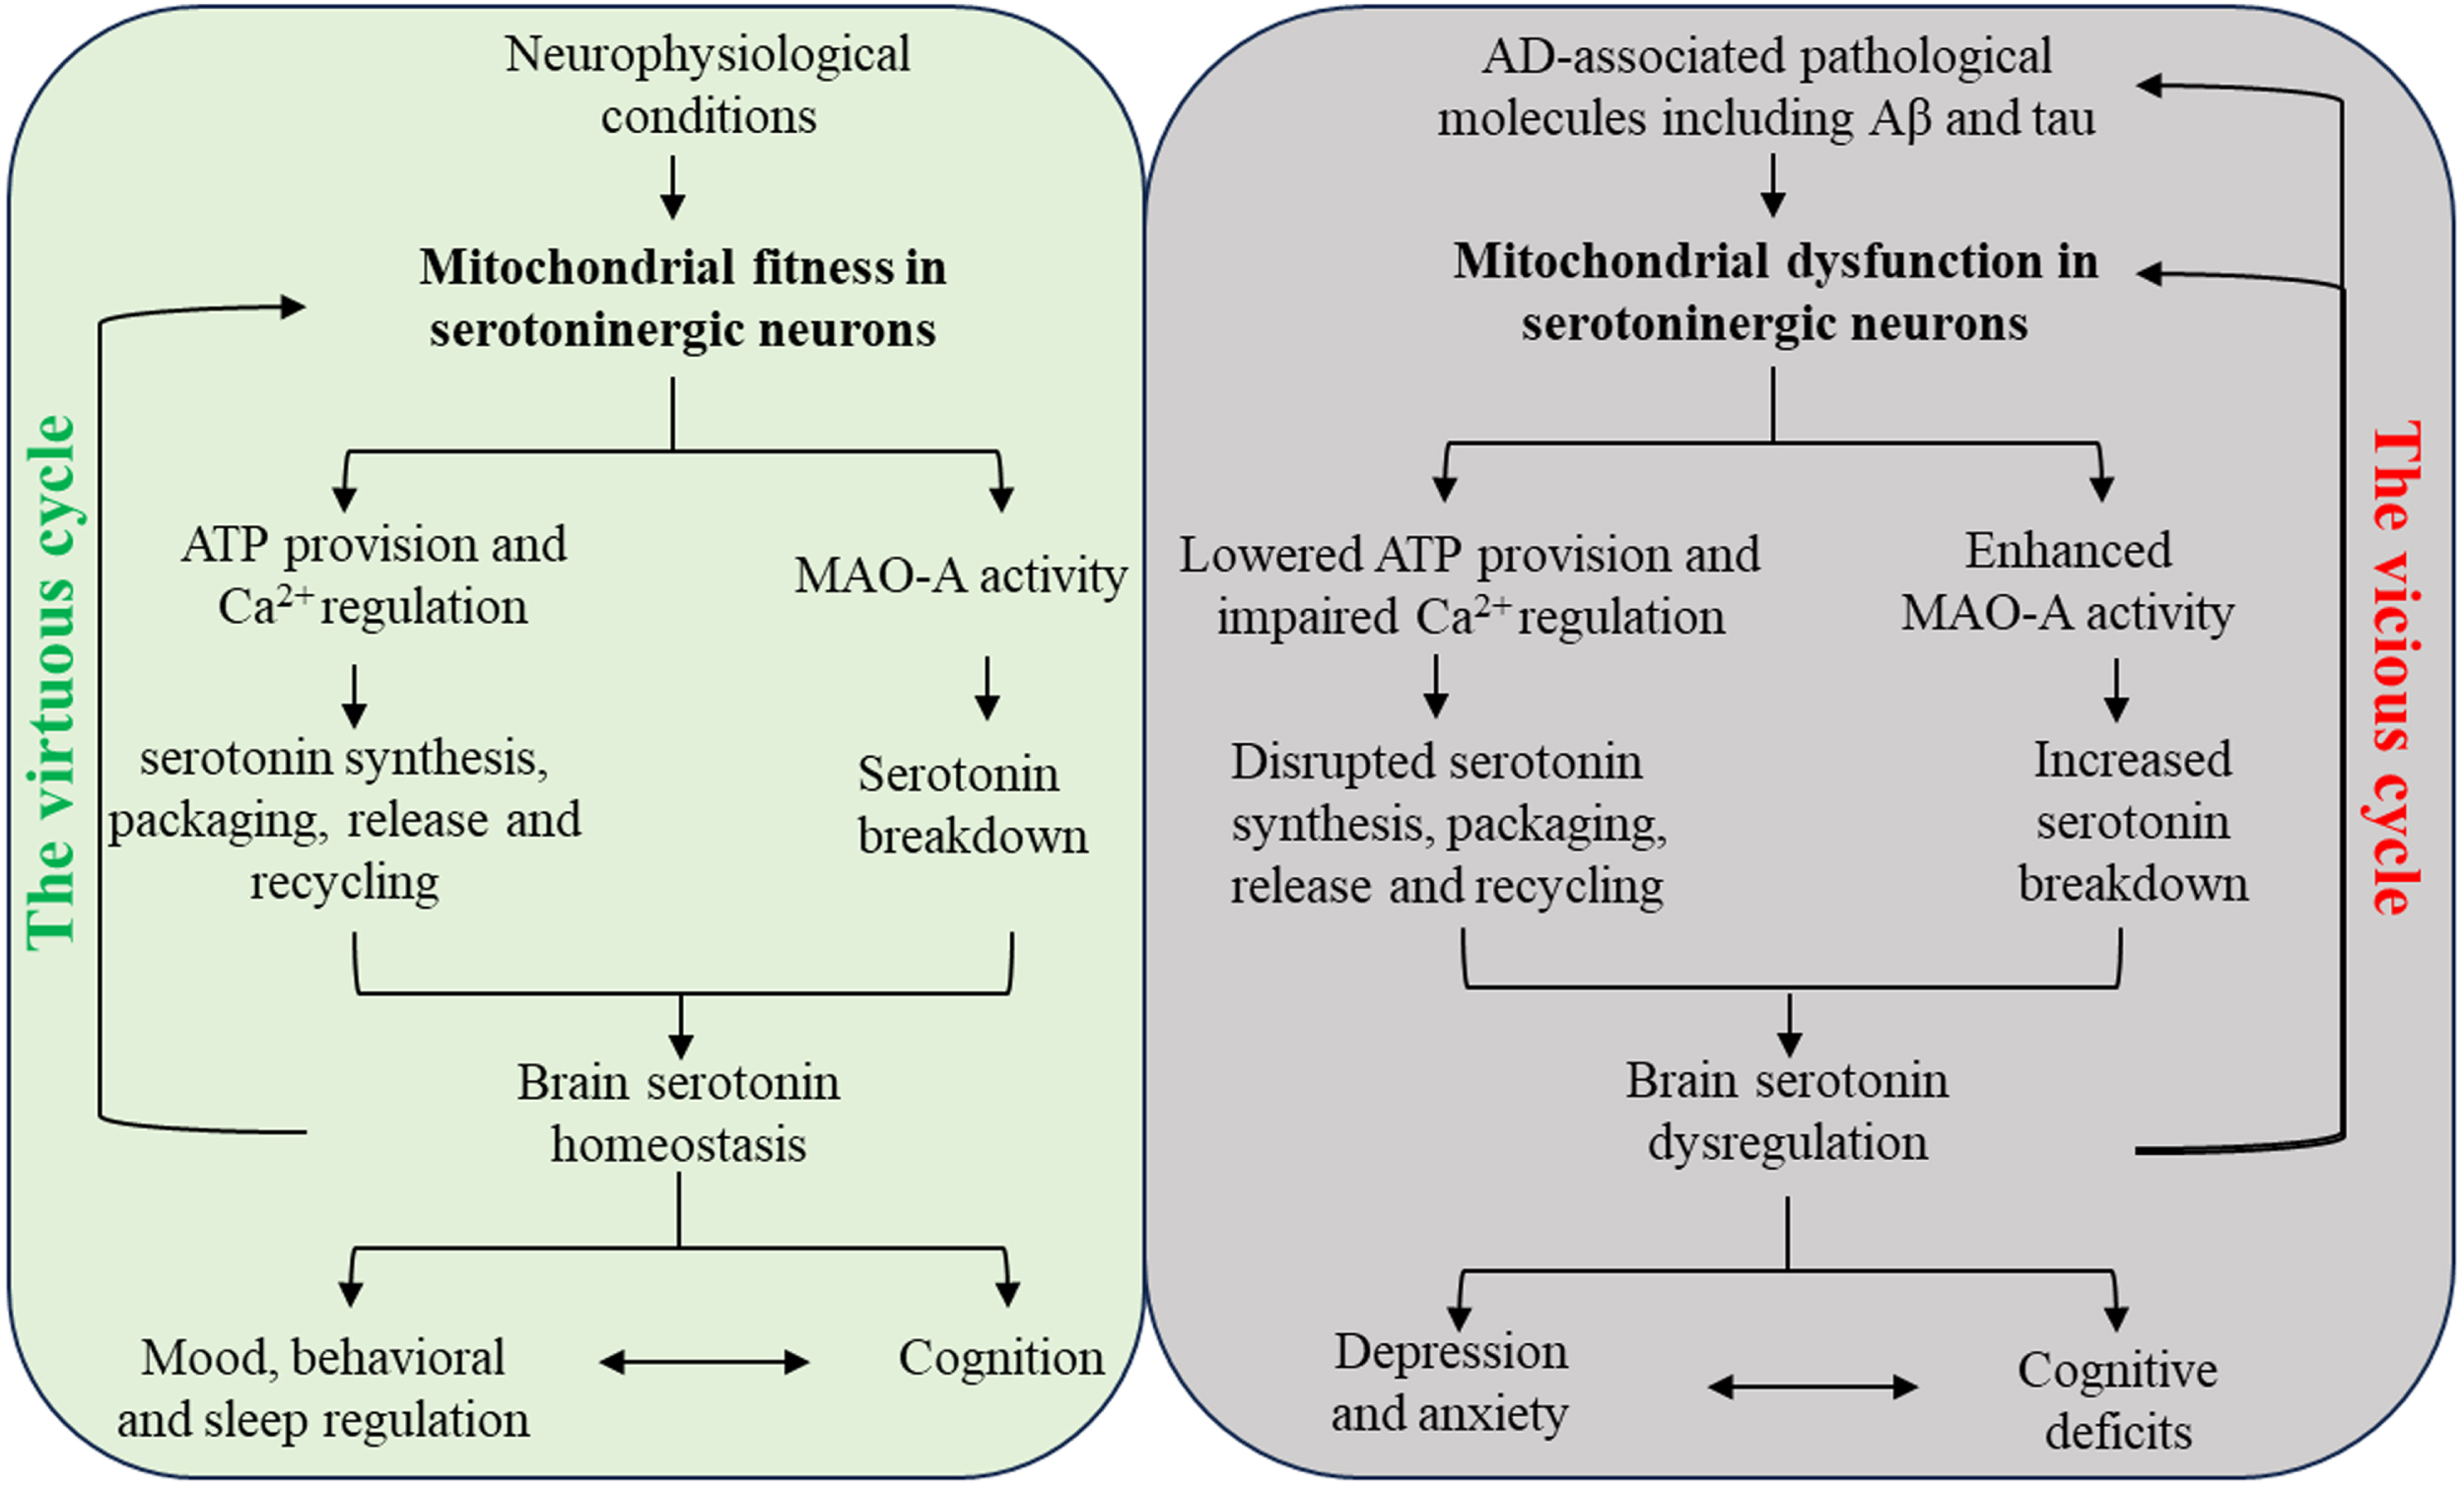 Schematic diagram of the interactions between serotonin regulation and mitochondria in serotoninergic neurons in neurobiology and AD. In physiological conditions, mitochondria in serotoninergic neurons support the metabolism of serotonin and brain serotonin homeostasis, leading to normal mood and cognition. The beneficial effect of serotonin system on mitochondrial fitness thus forms a virtuous cycle with mitochondria-related serotonin regulation. In AD-relevant pathological settings, Mitochondria in serotoninergic neurons demonstrate impaired function and enhanced MAO-A activity in response to AD-associated pathological molecules including Aβ and pathological tau, resulting in serotonin deficiency. The serotonin system dysregulation eventually promotes mood disturbances and cognitive impairment, which reinforces each other. Furthermore, brain amyloidosis and tauopathy as well as serotoninergic neuronal mitochondrial dysfunction are exacerbated by serotonin dysregulation, culminating in a vicious cycle.